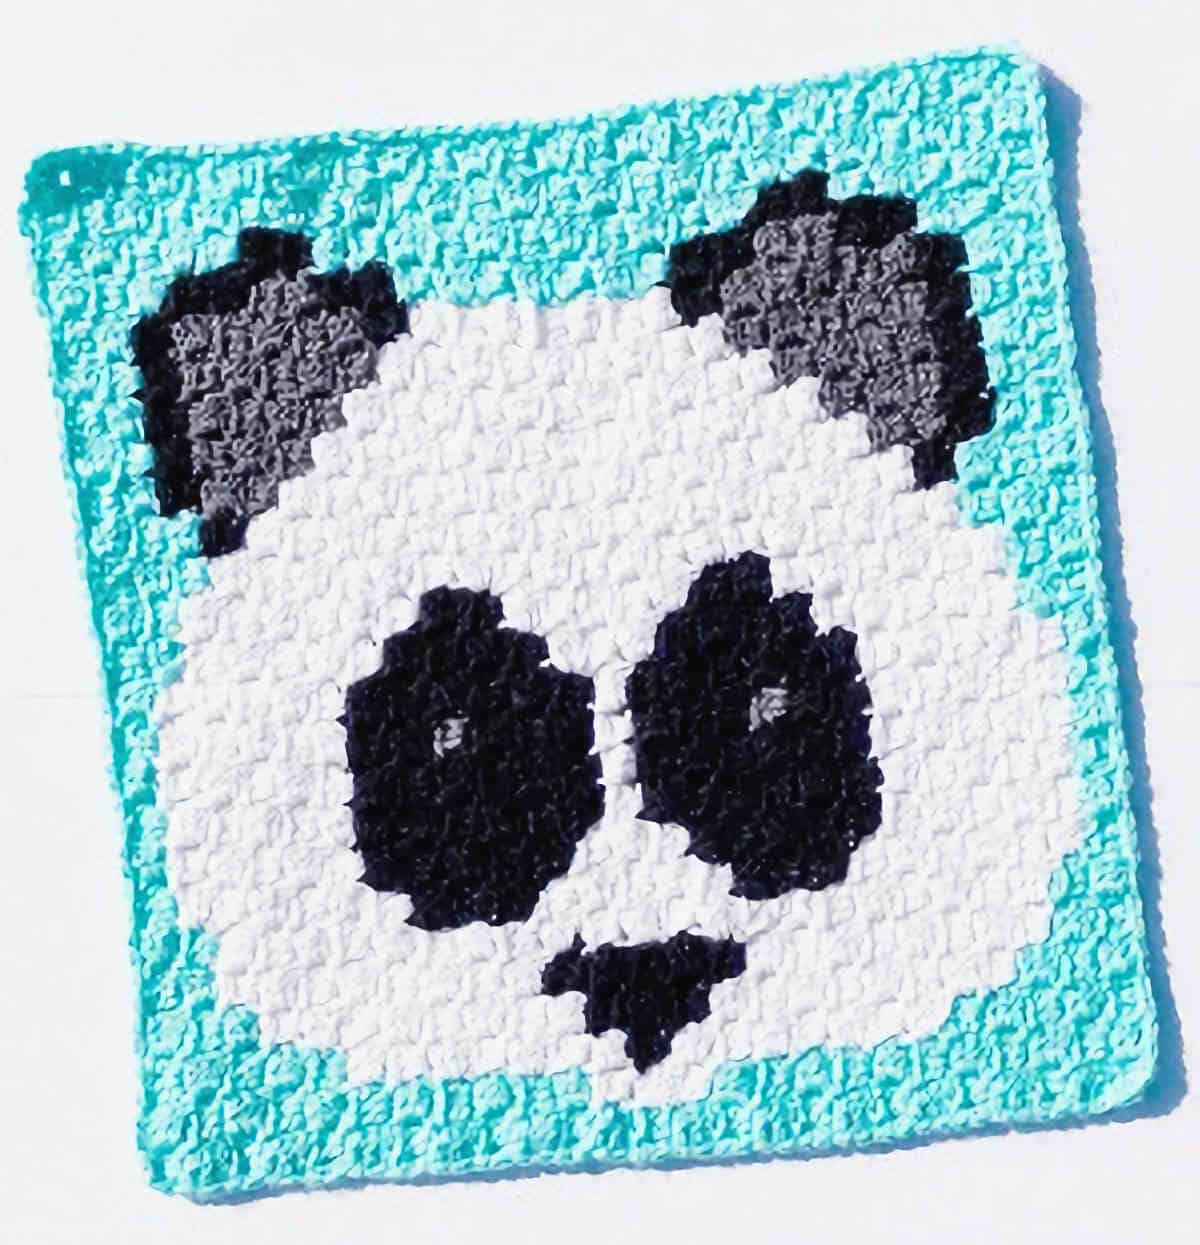 Crocheted blue square with panda face on it.